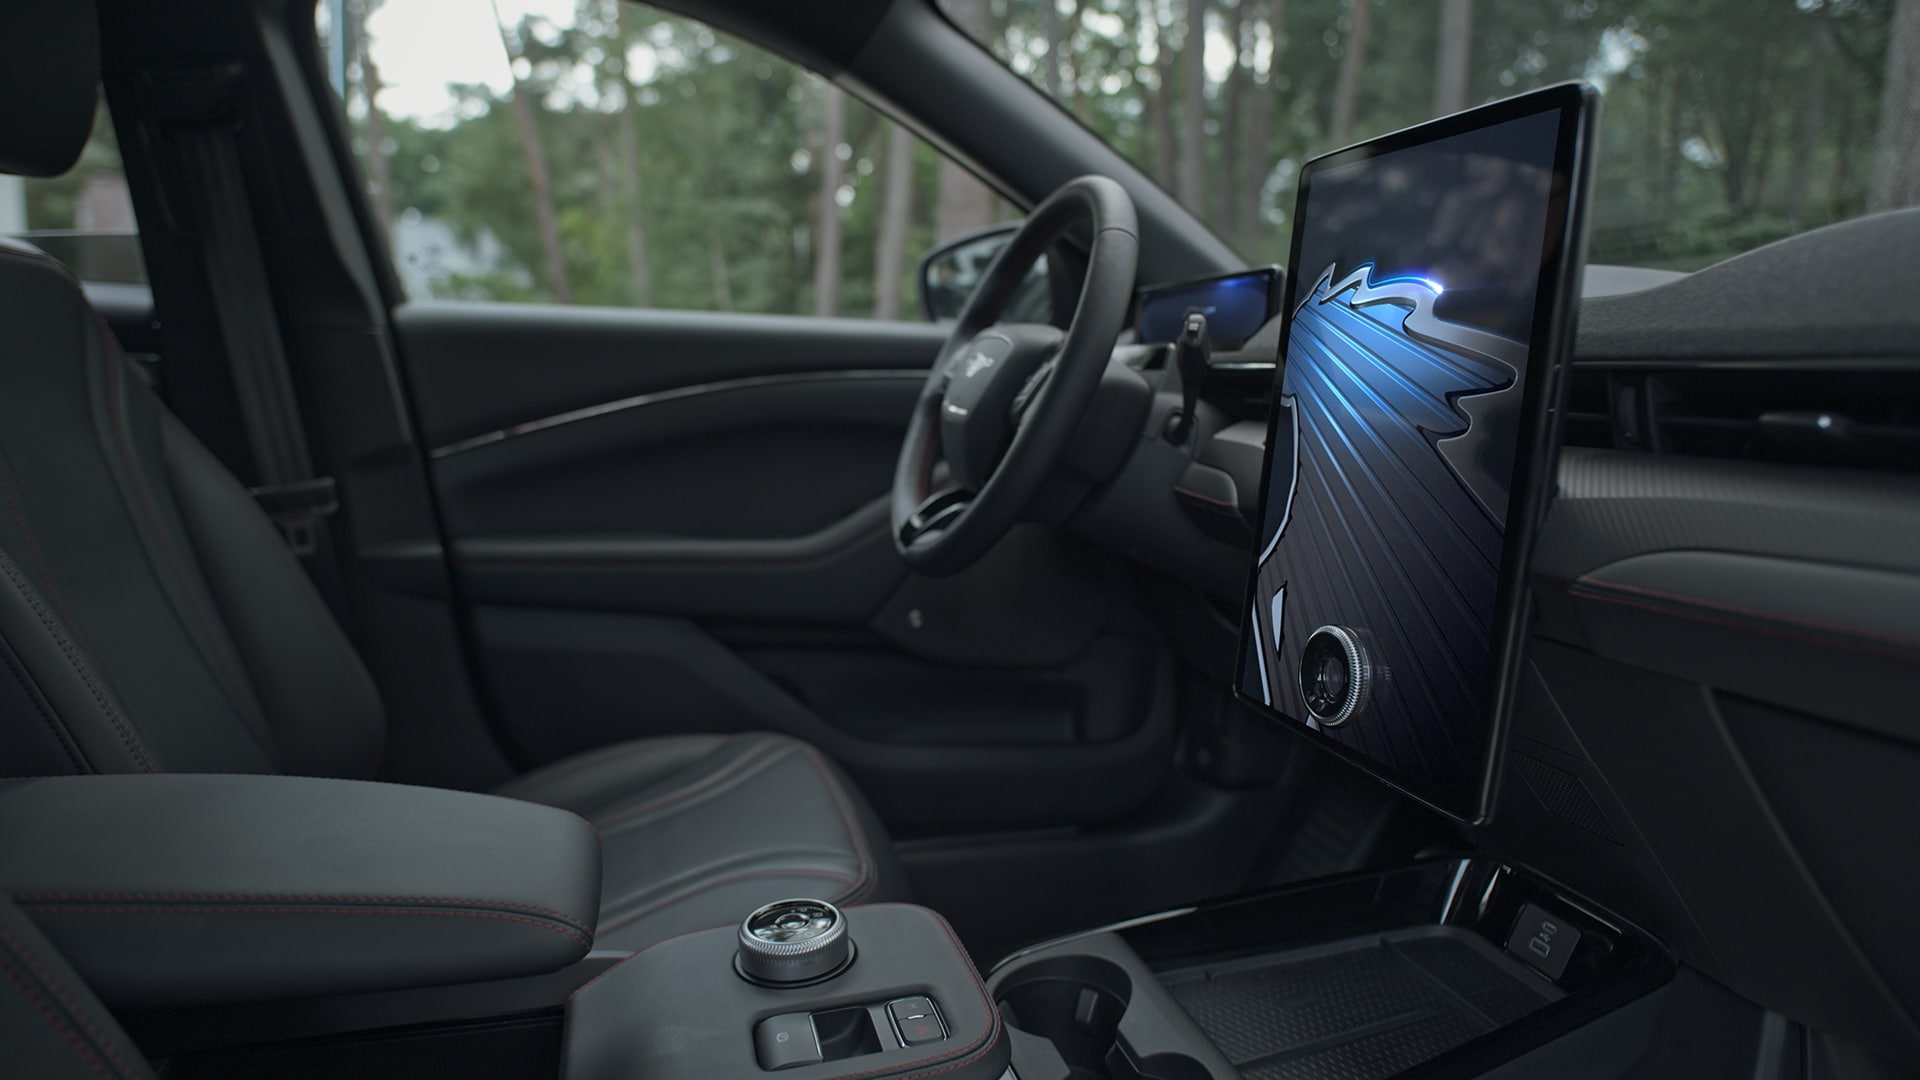 All-New Ford Mustang Mach-E interior with Next Generation Ford SYNC screen